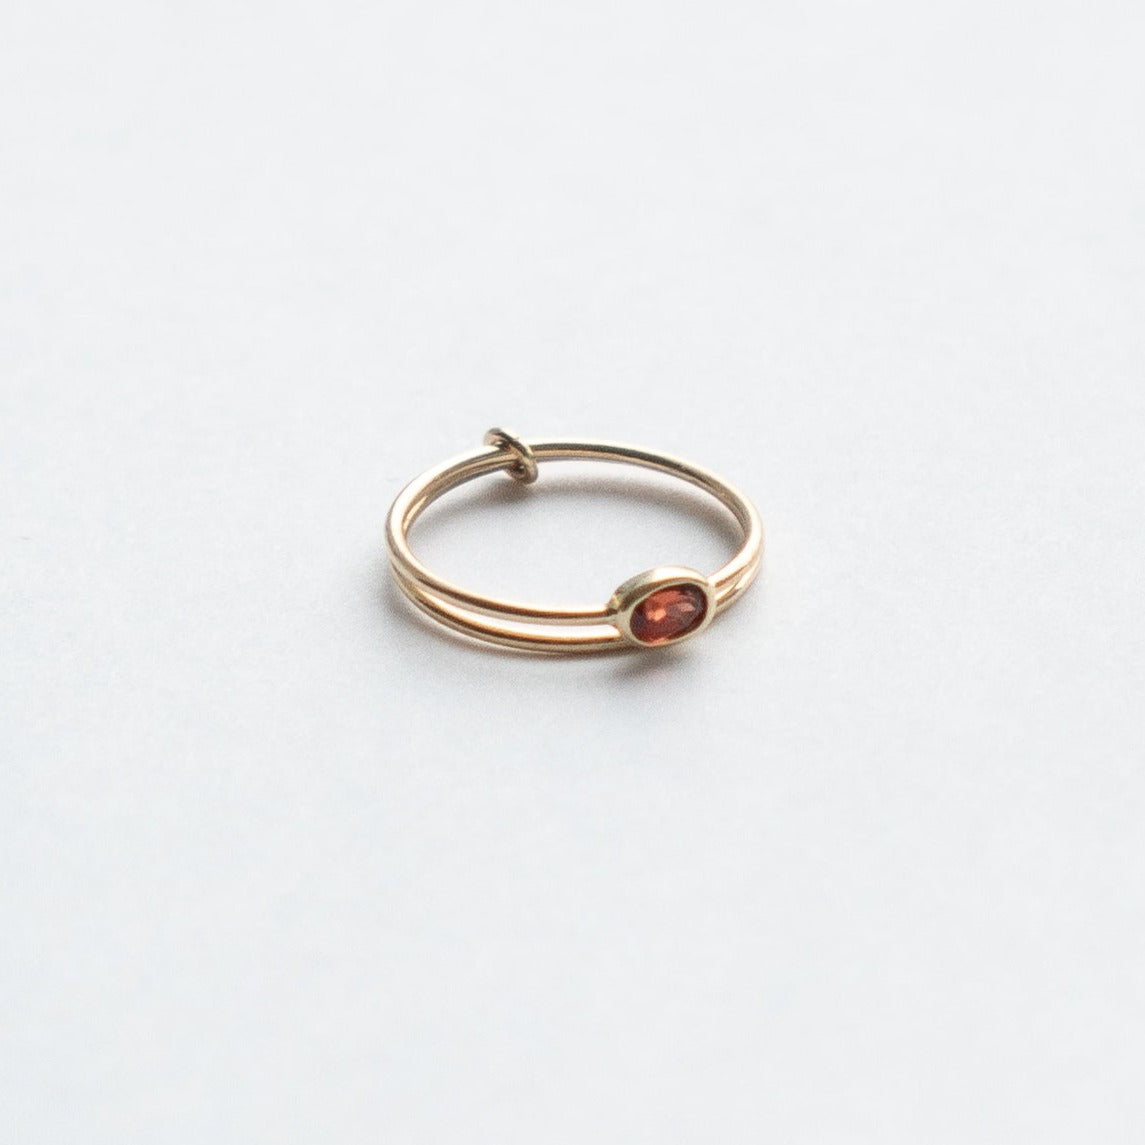 Dana Unique Ring in 14k Gold set with a 0.3ct garnet by SHW Fine Jewelry